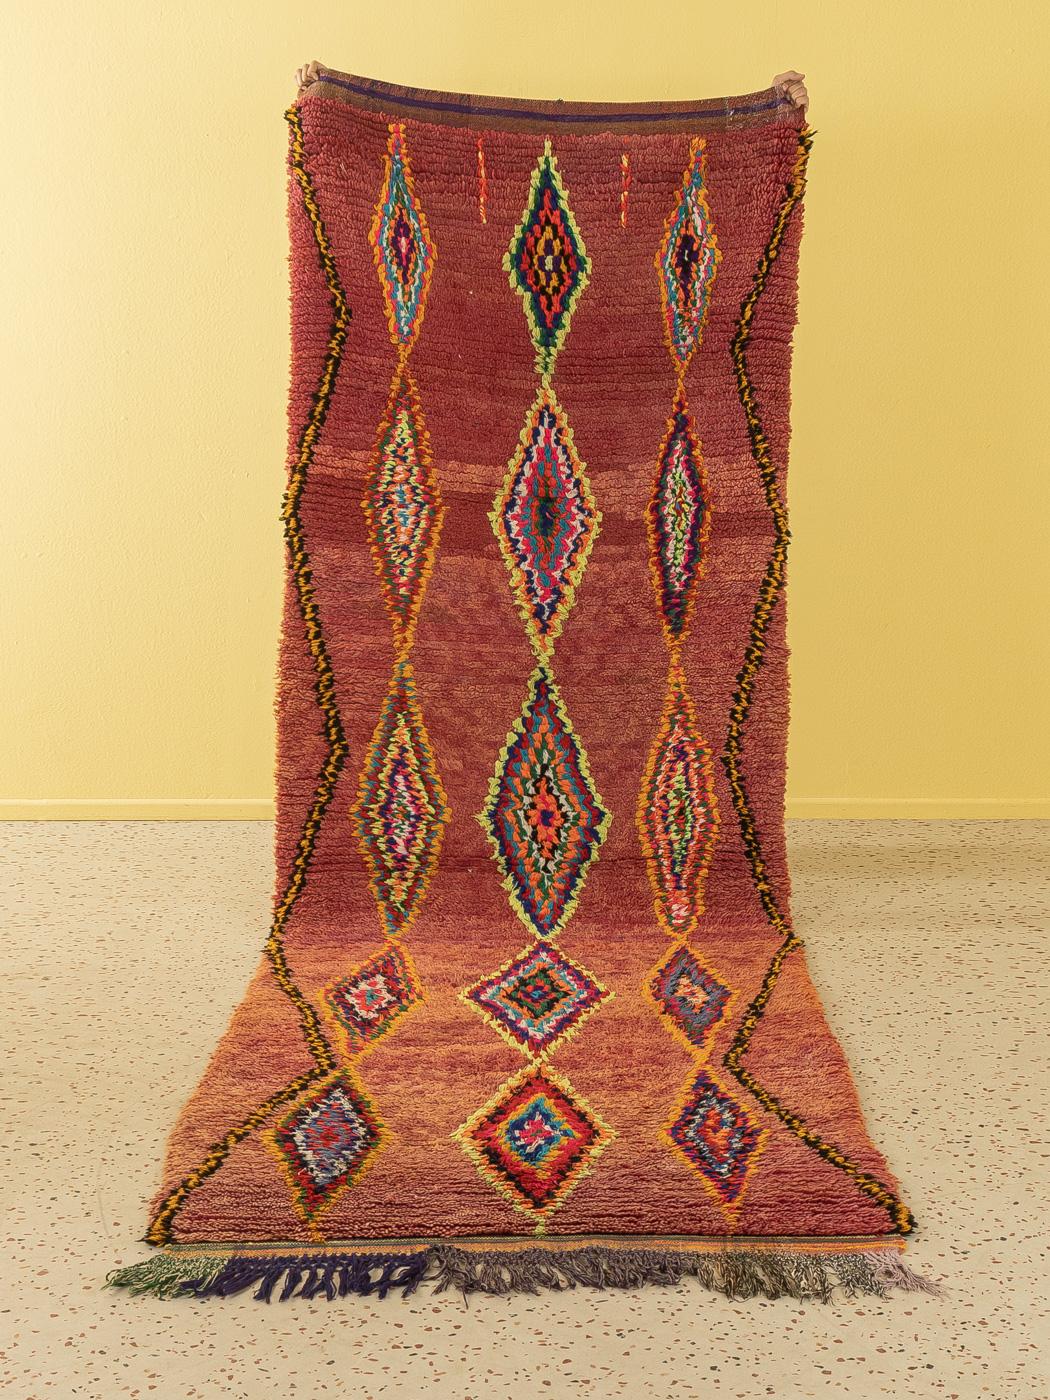 This Boujad is a vintage wool rug with some recycled wool parts – soft and comfortable underfoot. Our Berber rugs are handmade, one knot at a time. Each of our Berber rugs is a long-lasting one-of-a-kind piece, created in a sustainable manner with